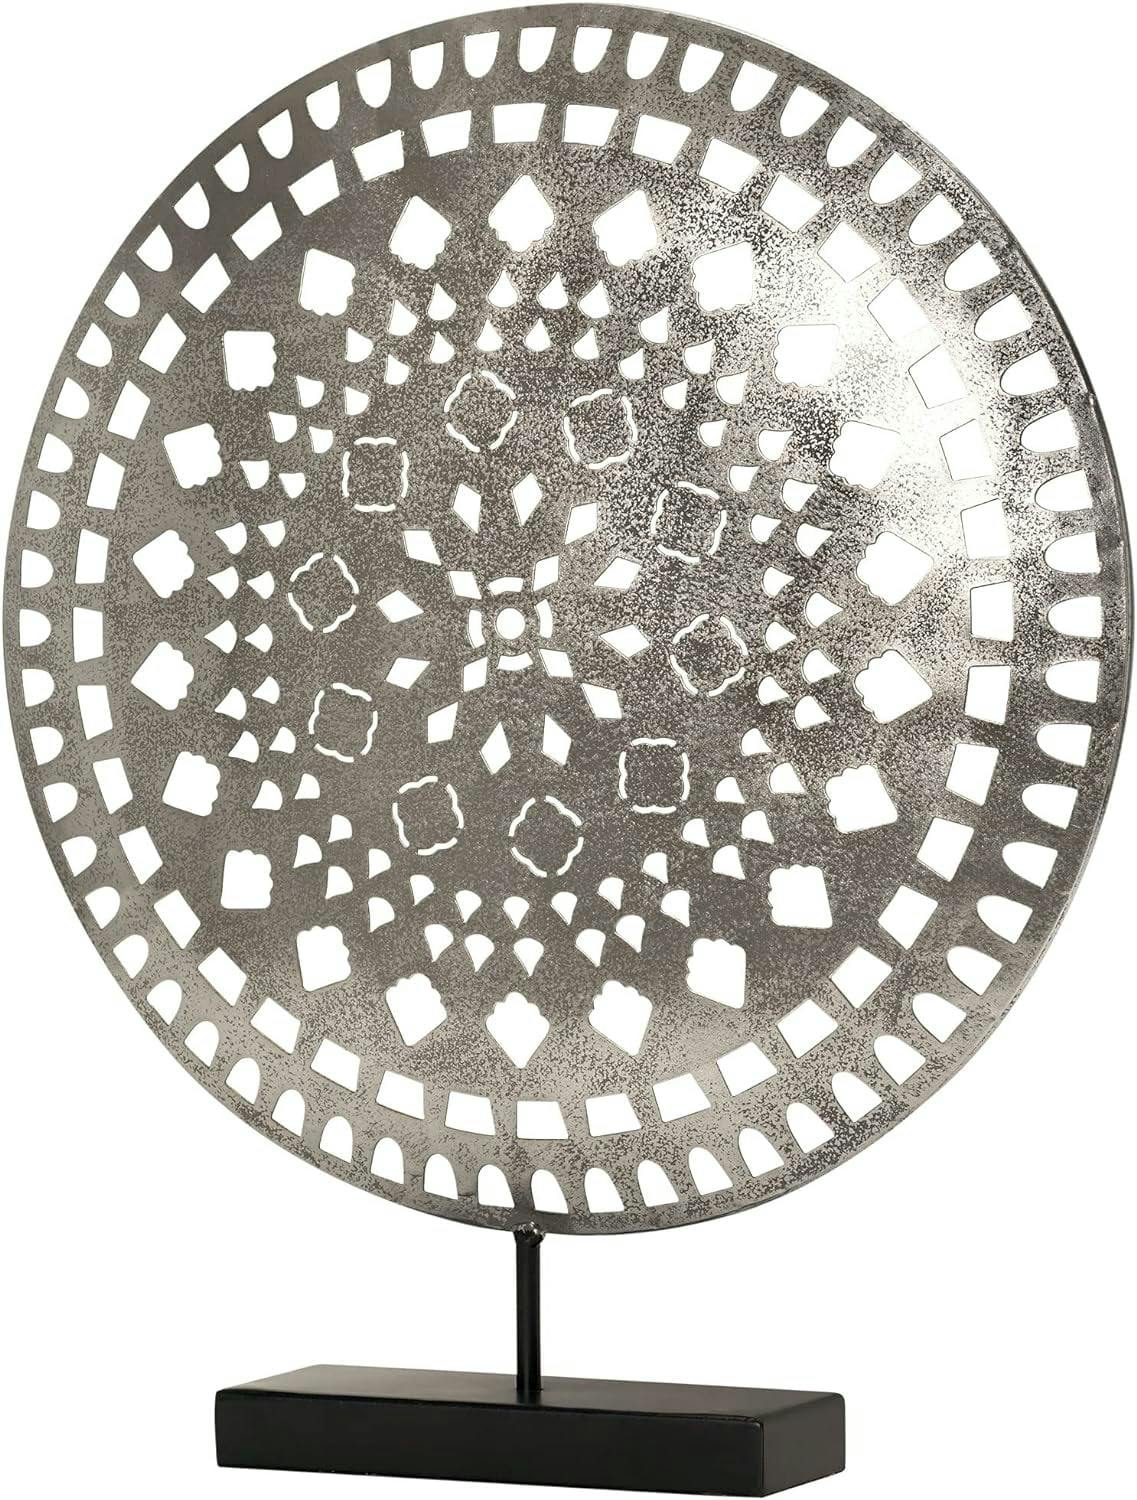 Distressed Silver Geometric Medallion Metal Sculpture on Stand